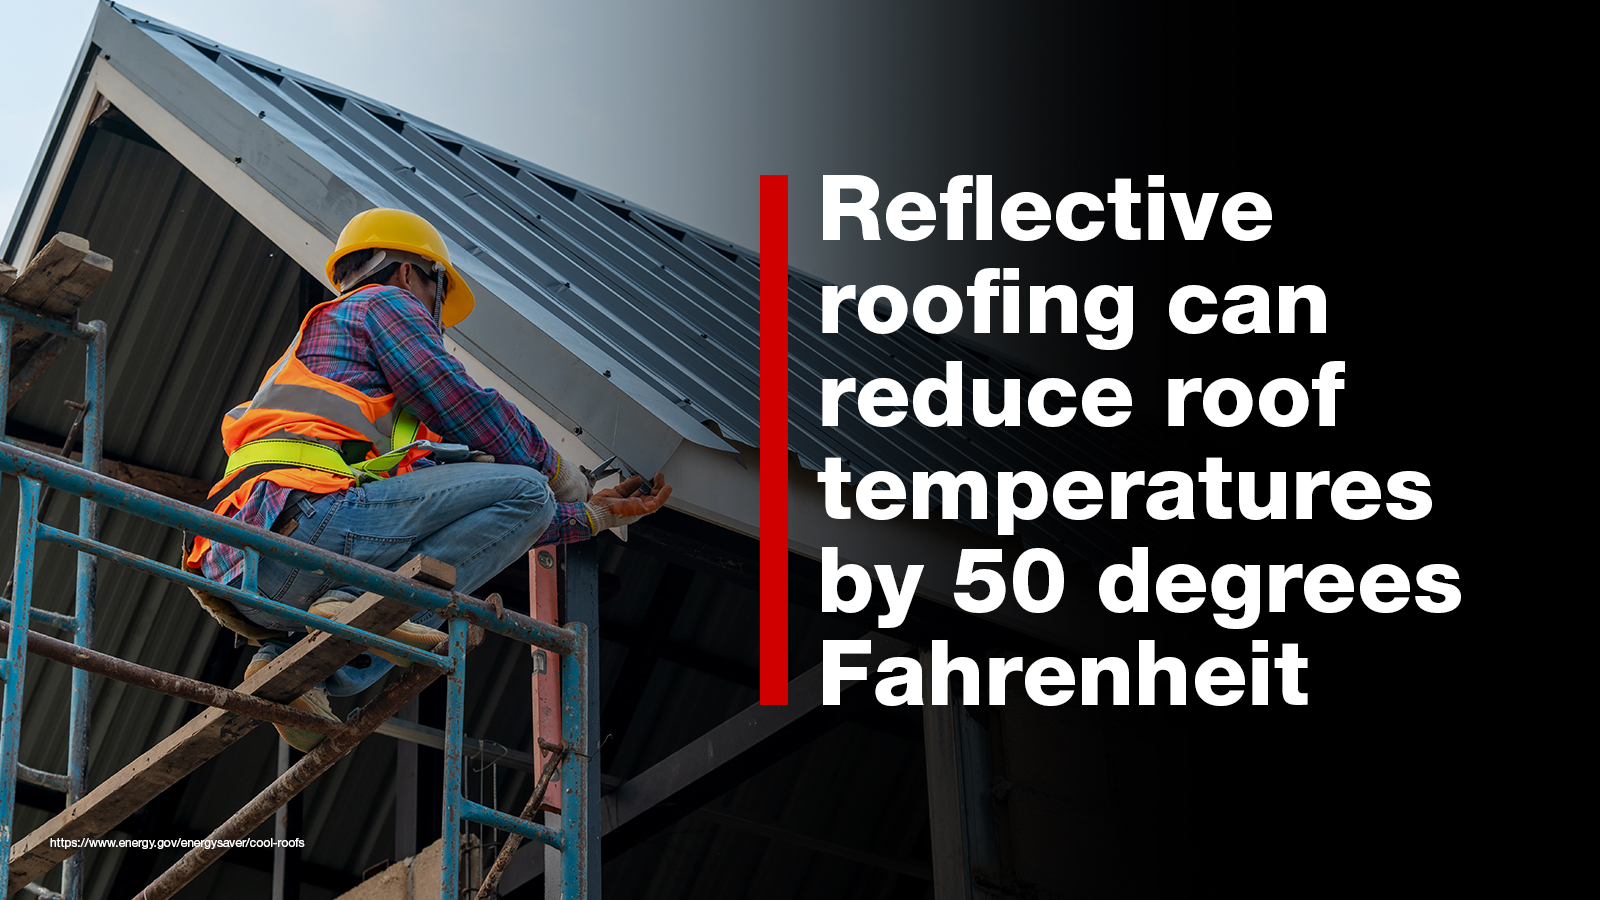 Reflective roofing can reduce temperatures by 50 degrees F.